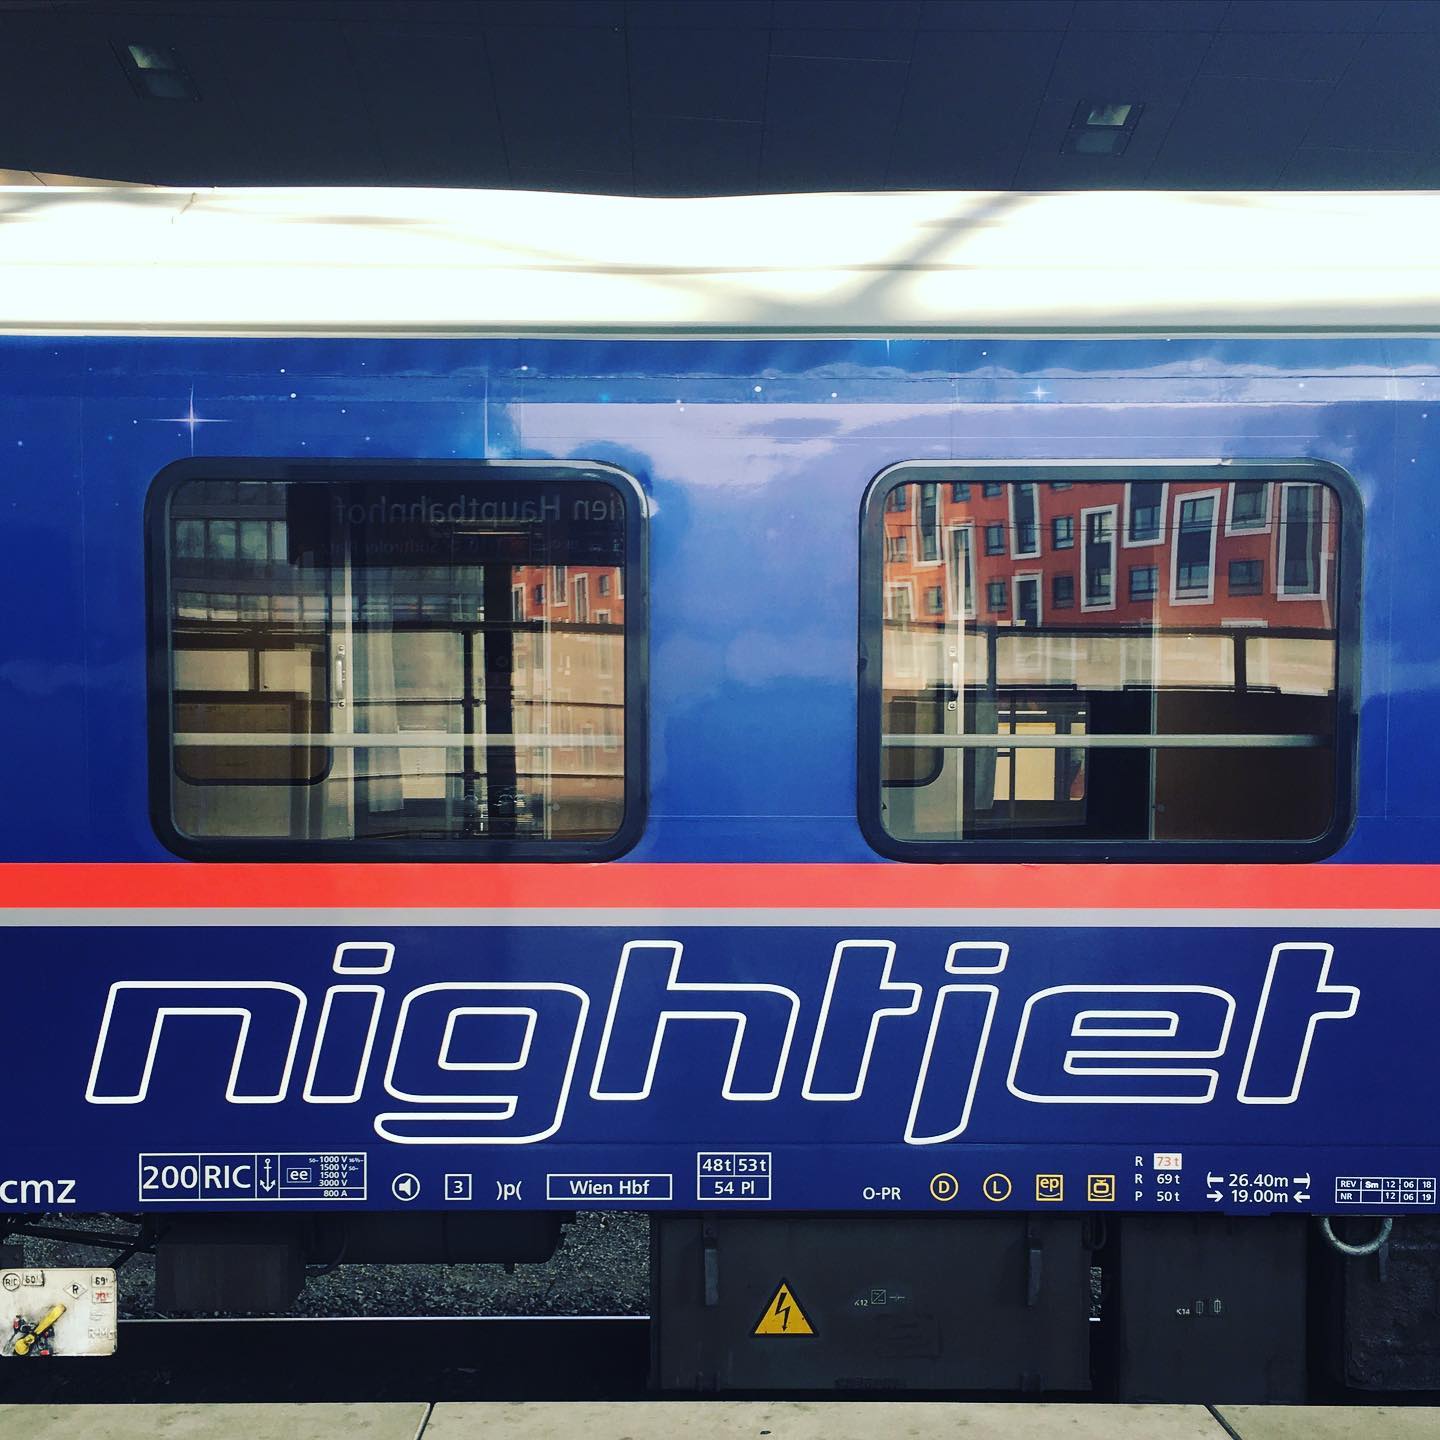 I’m often asked: is ÖBB’s #nightjet not an answer to the problems of night trains in Europe? The service is super, but is ÖBB ever going to run Köln-Warsaw or Amsterdam-Marseille? I doubt it. We need Europe wide solutions instead.